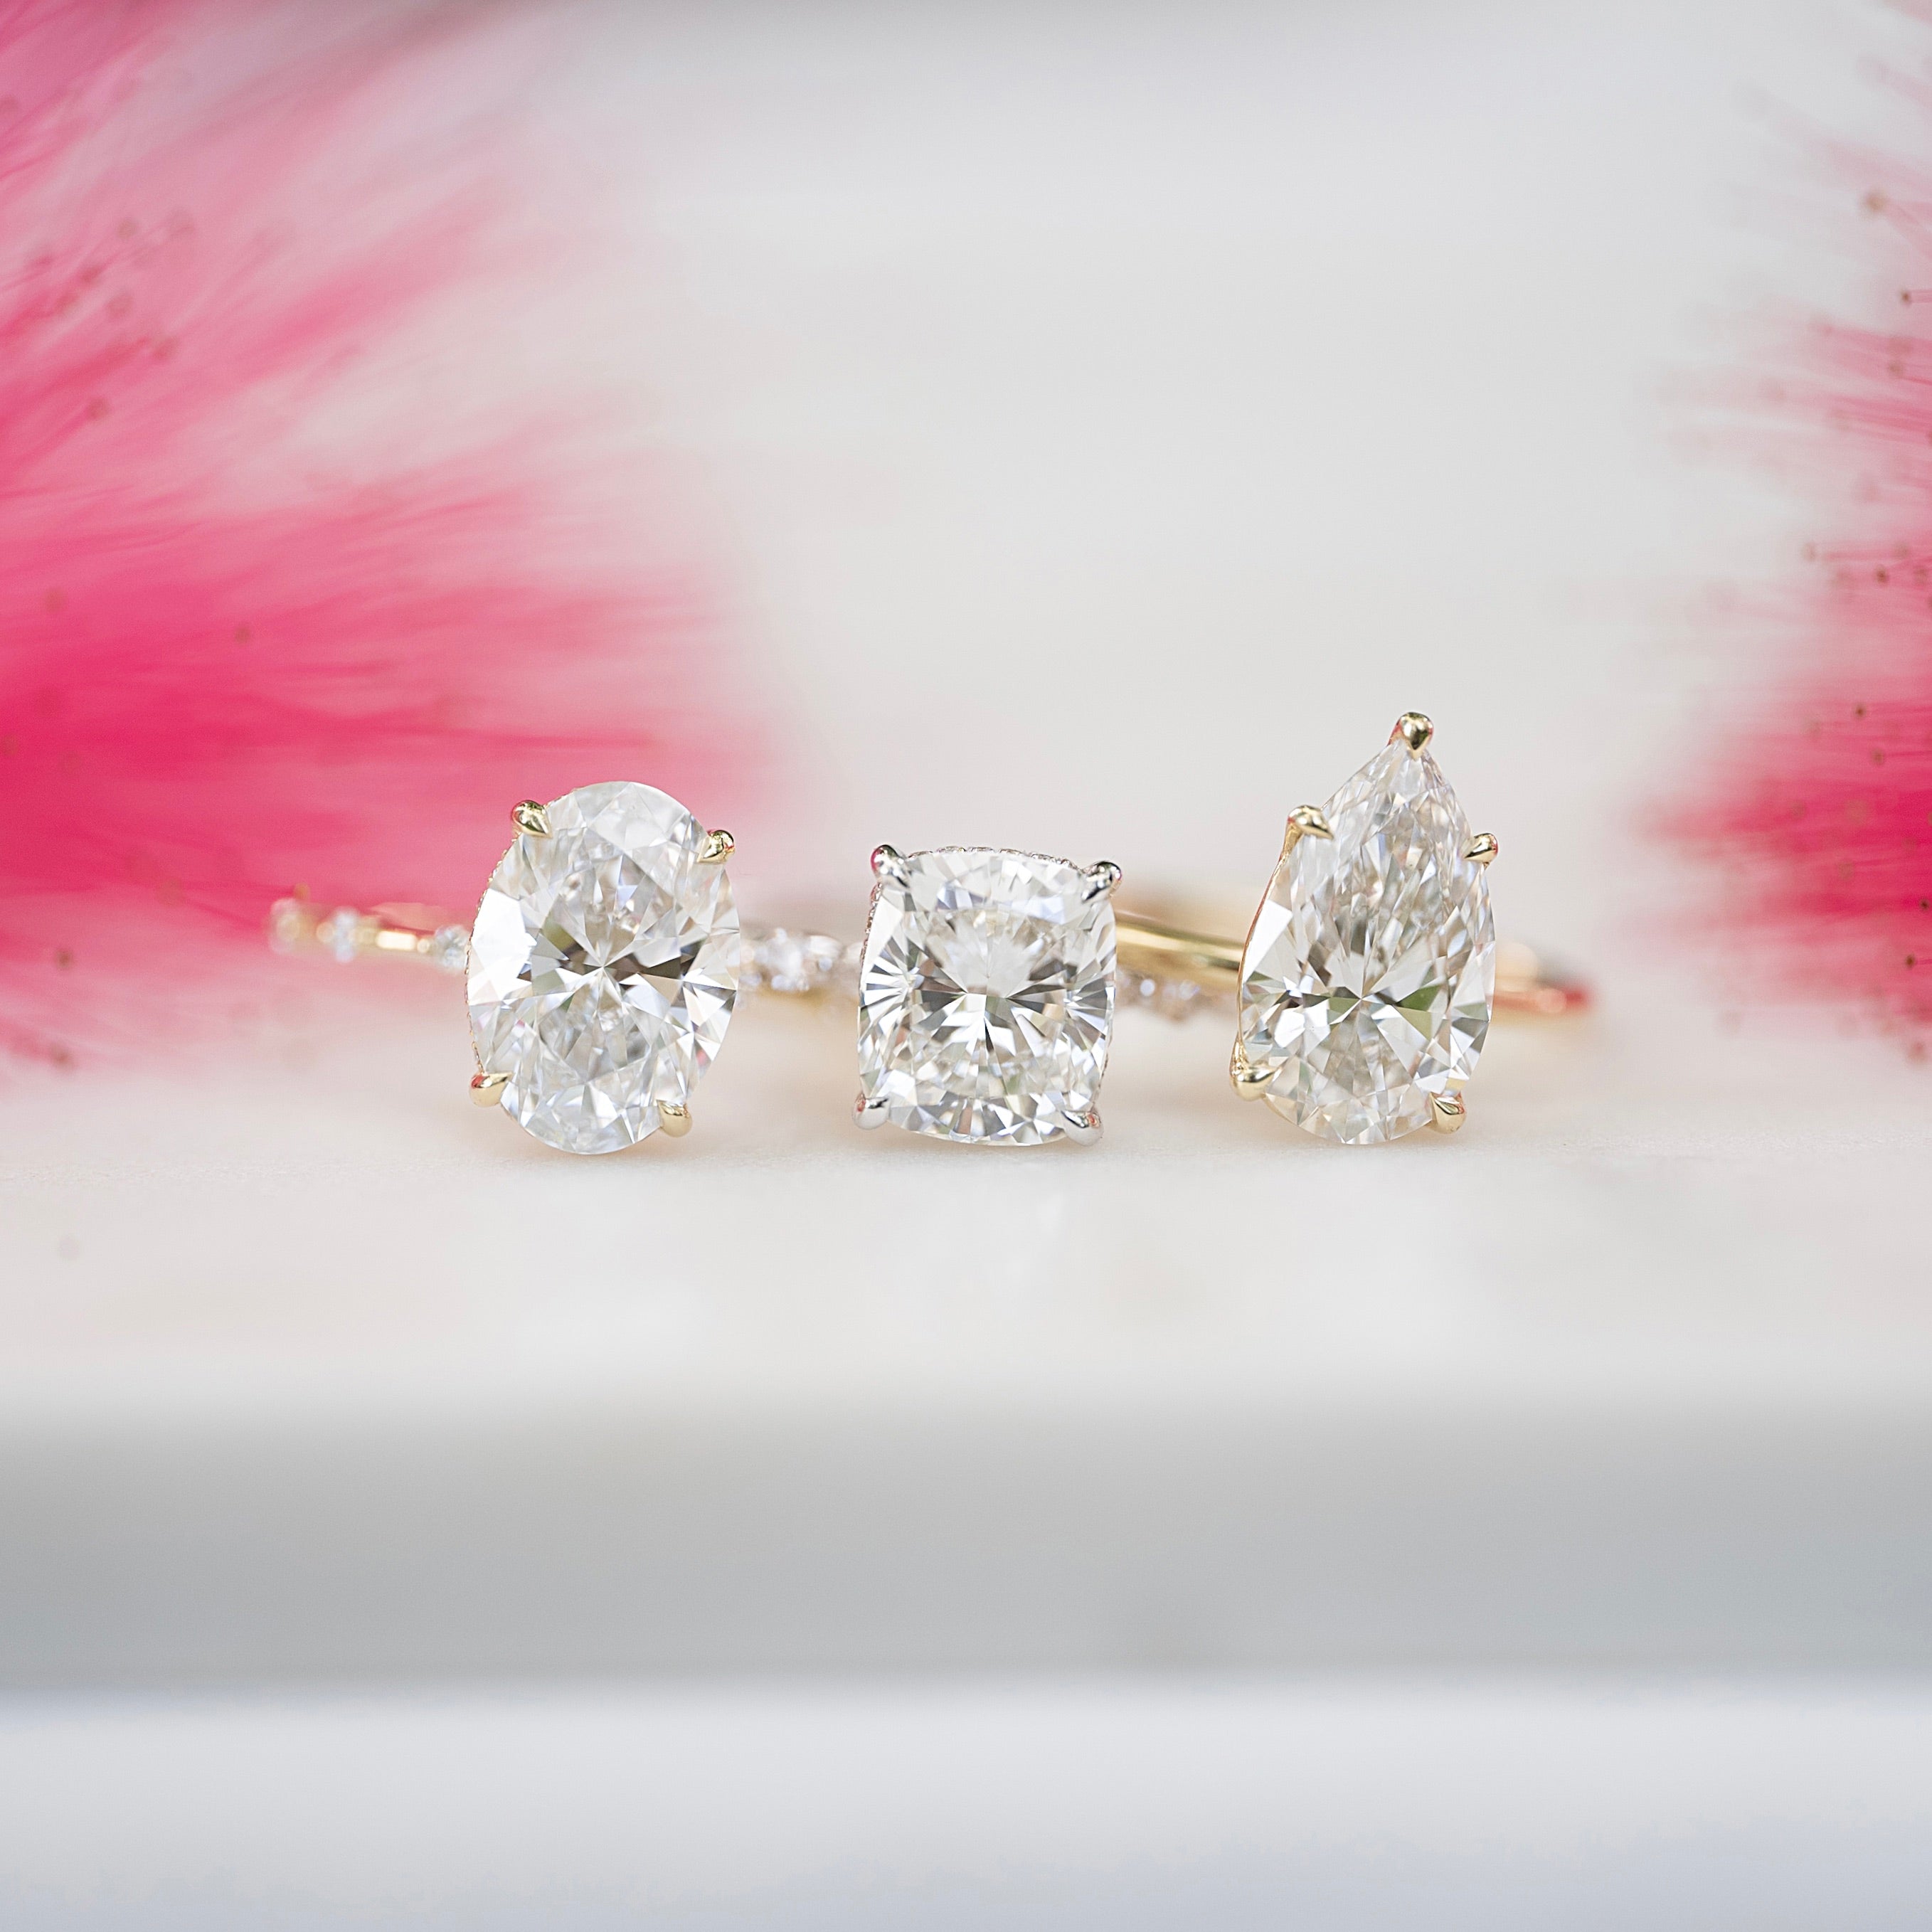 What Is The Average Carat Size For An Engagement Ring?